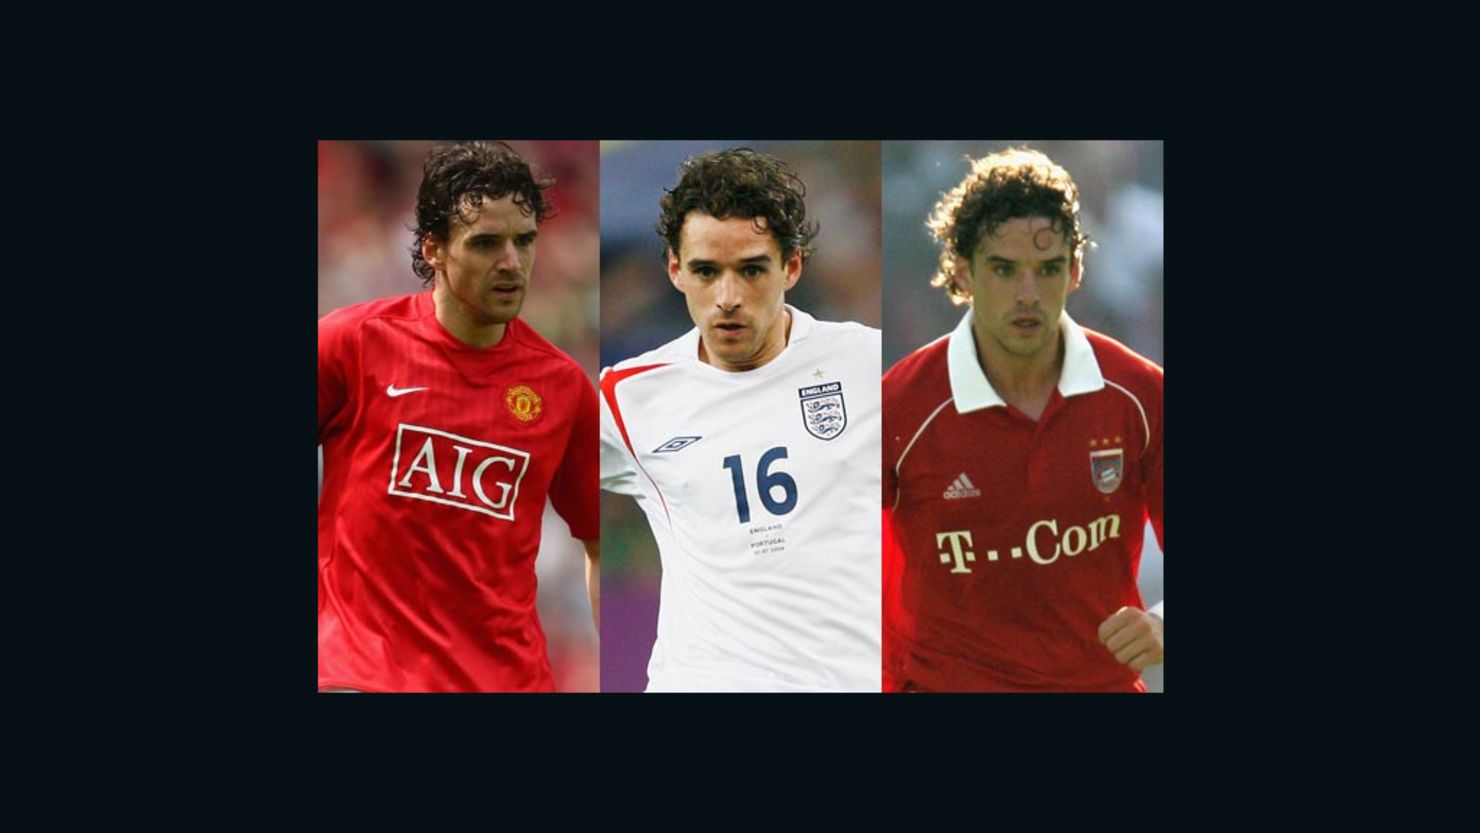 Owen Hargreaves plied his trade with Manchester United and Bayern Munich as well as starring for the English national team.